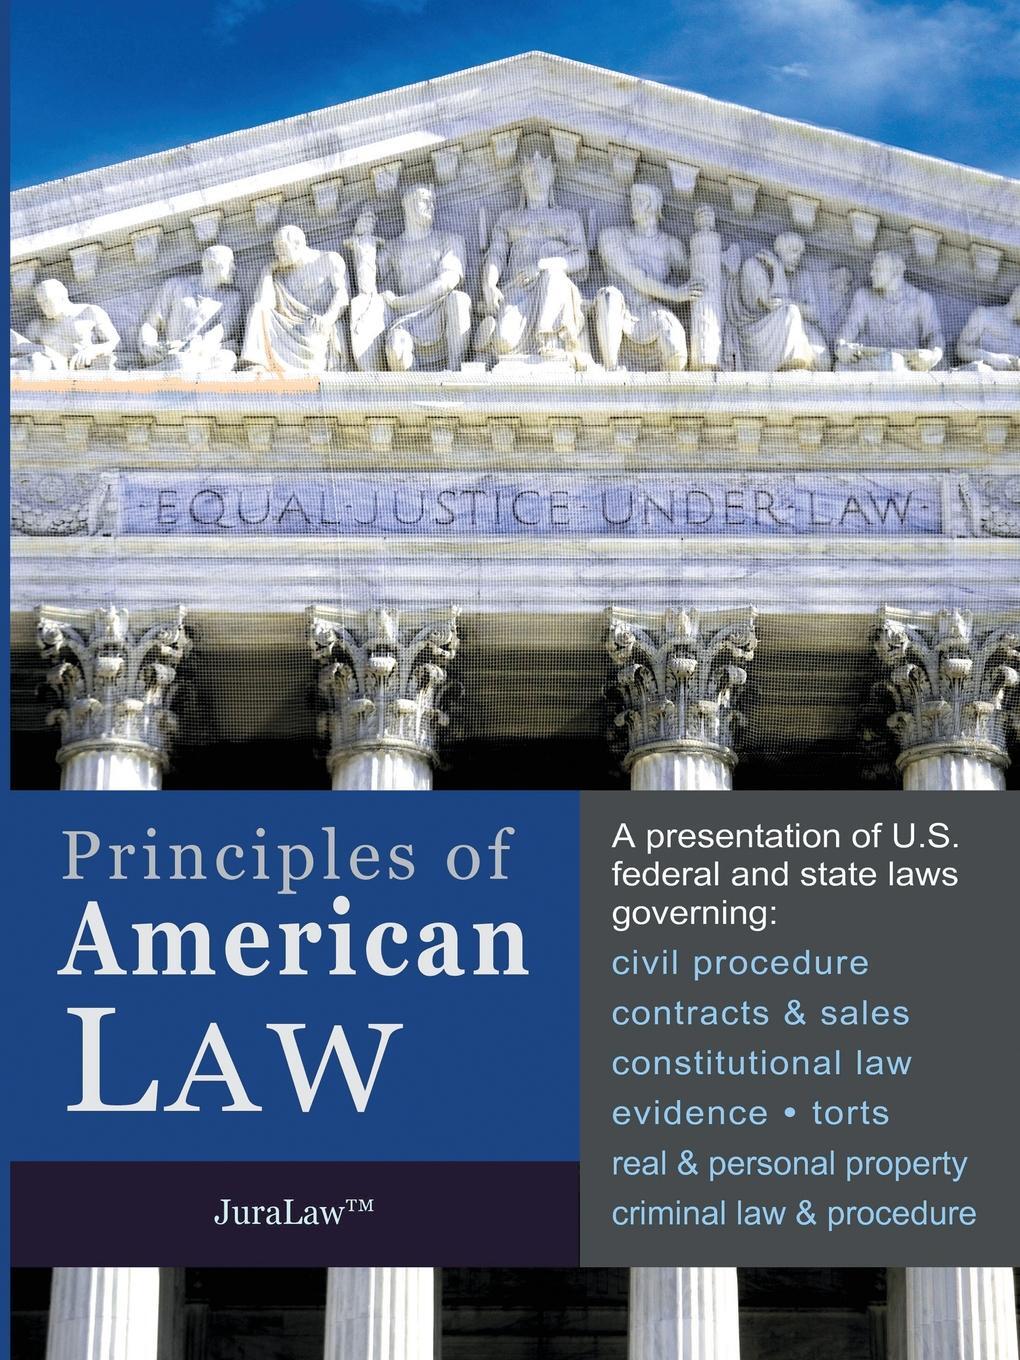 Principles of Law. American Law an Introduction. General principles of Law. Introduction to Law. American law